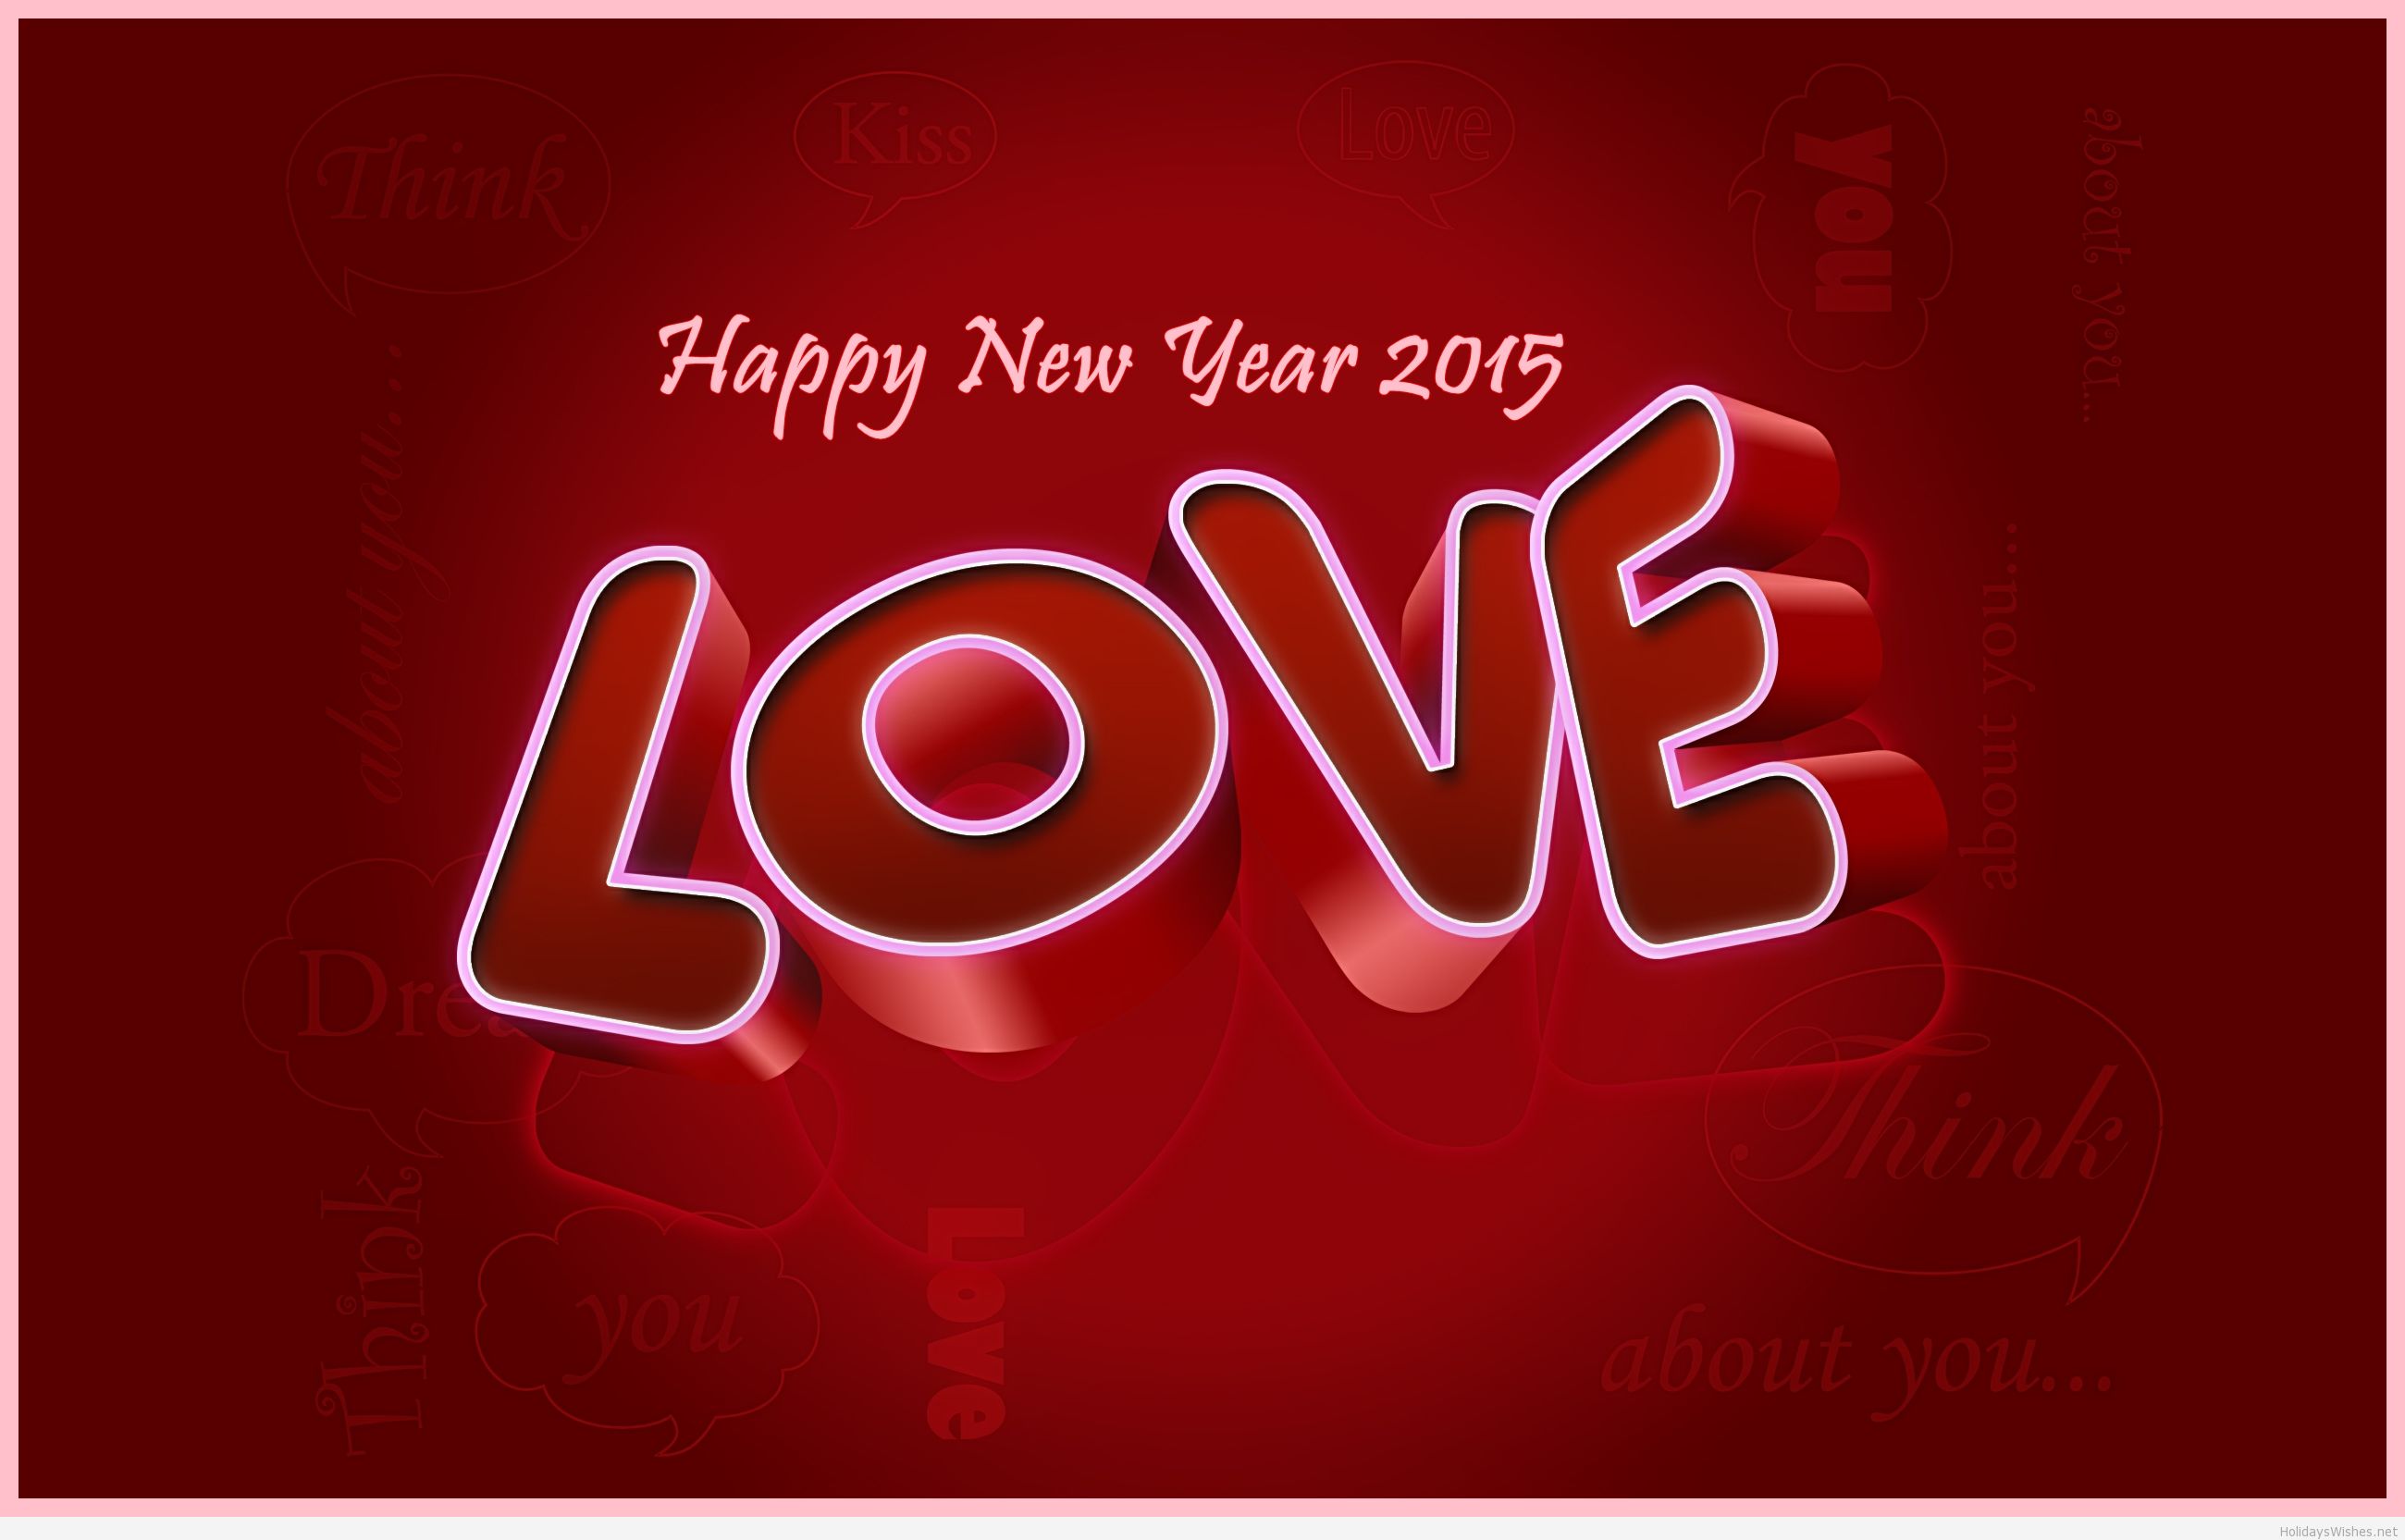 Love Messages Happy New Year